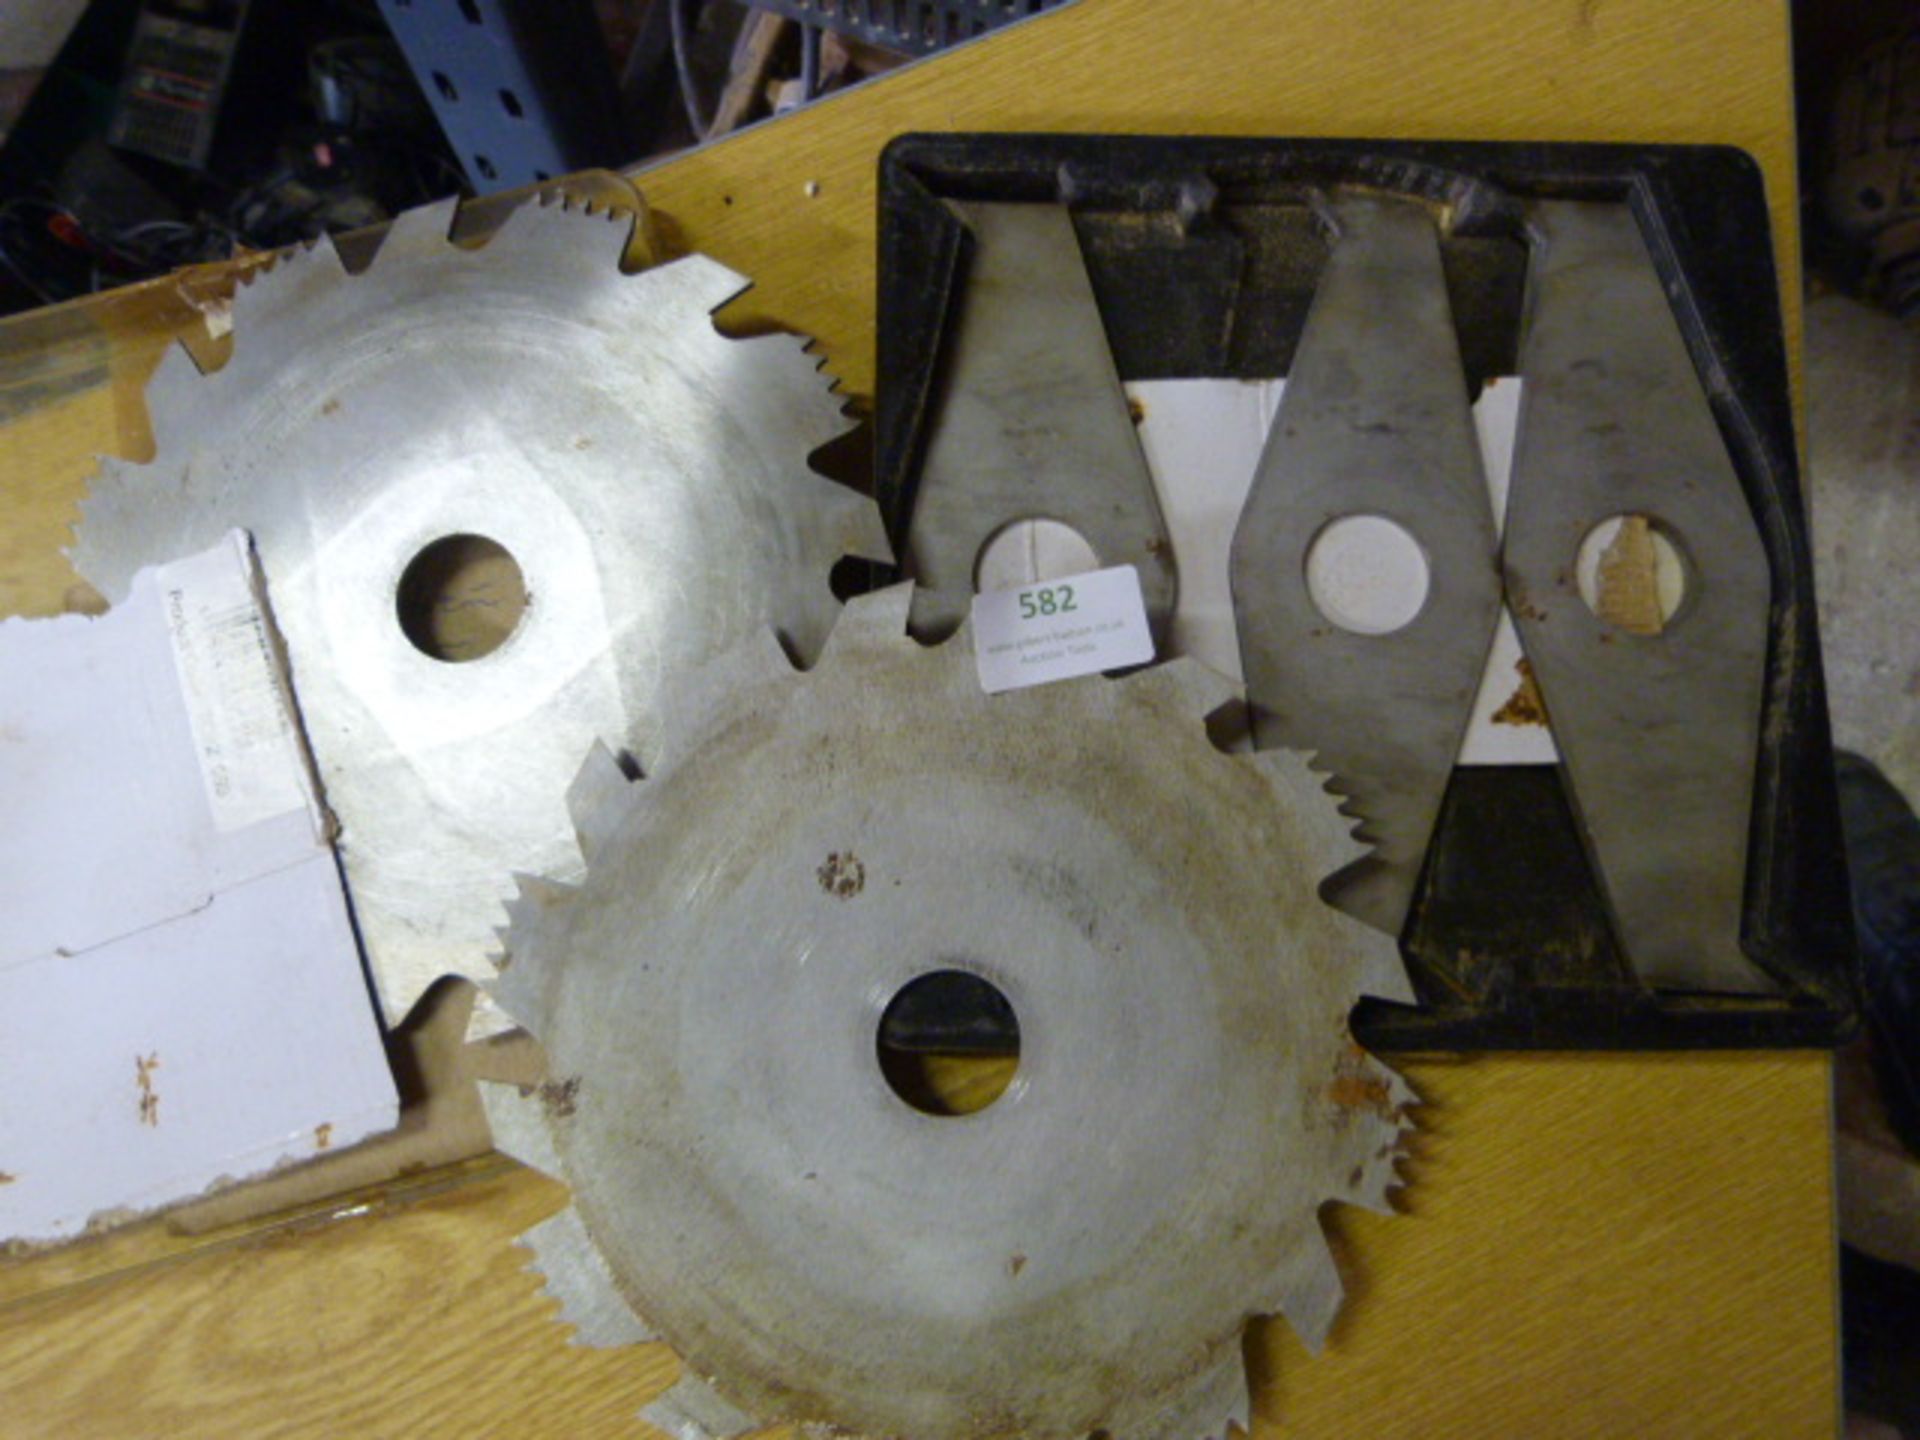 Box of Circular Saw Blades and Spindle Moulder Cut